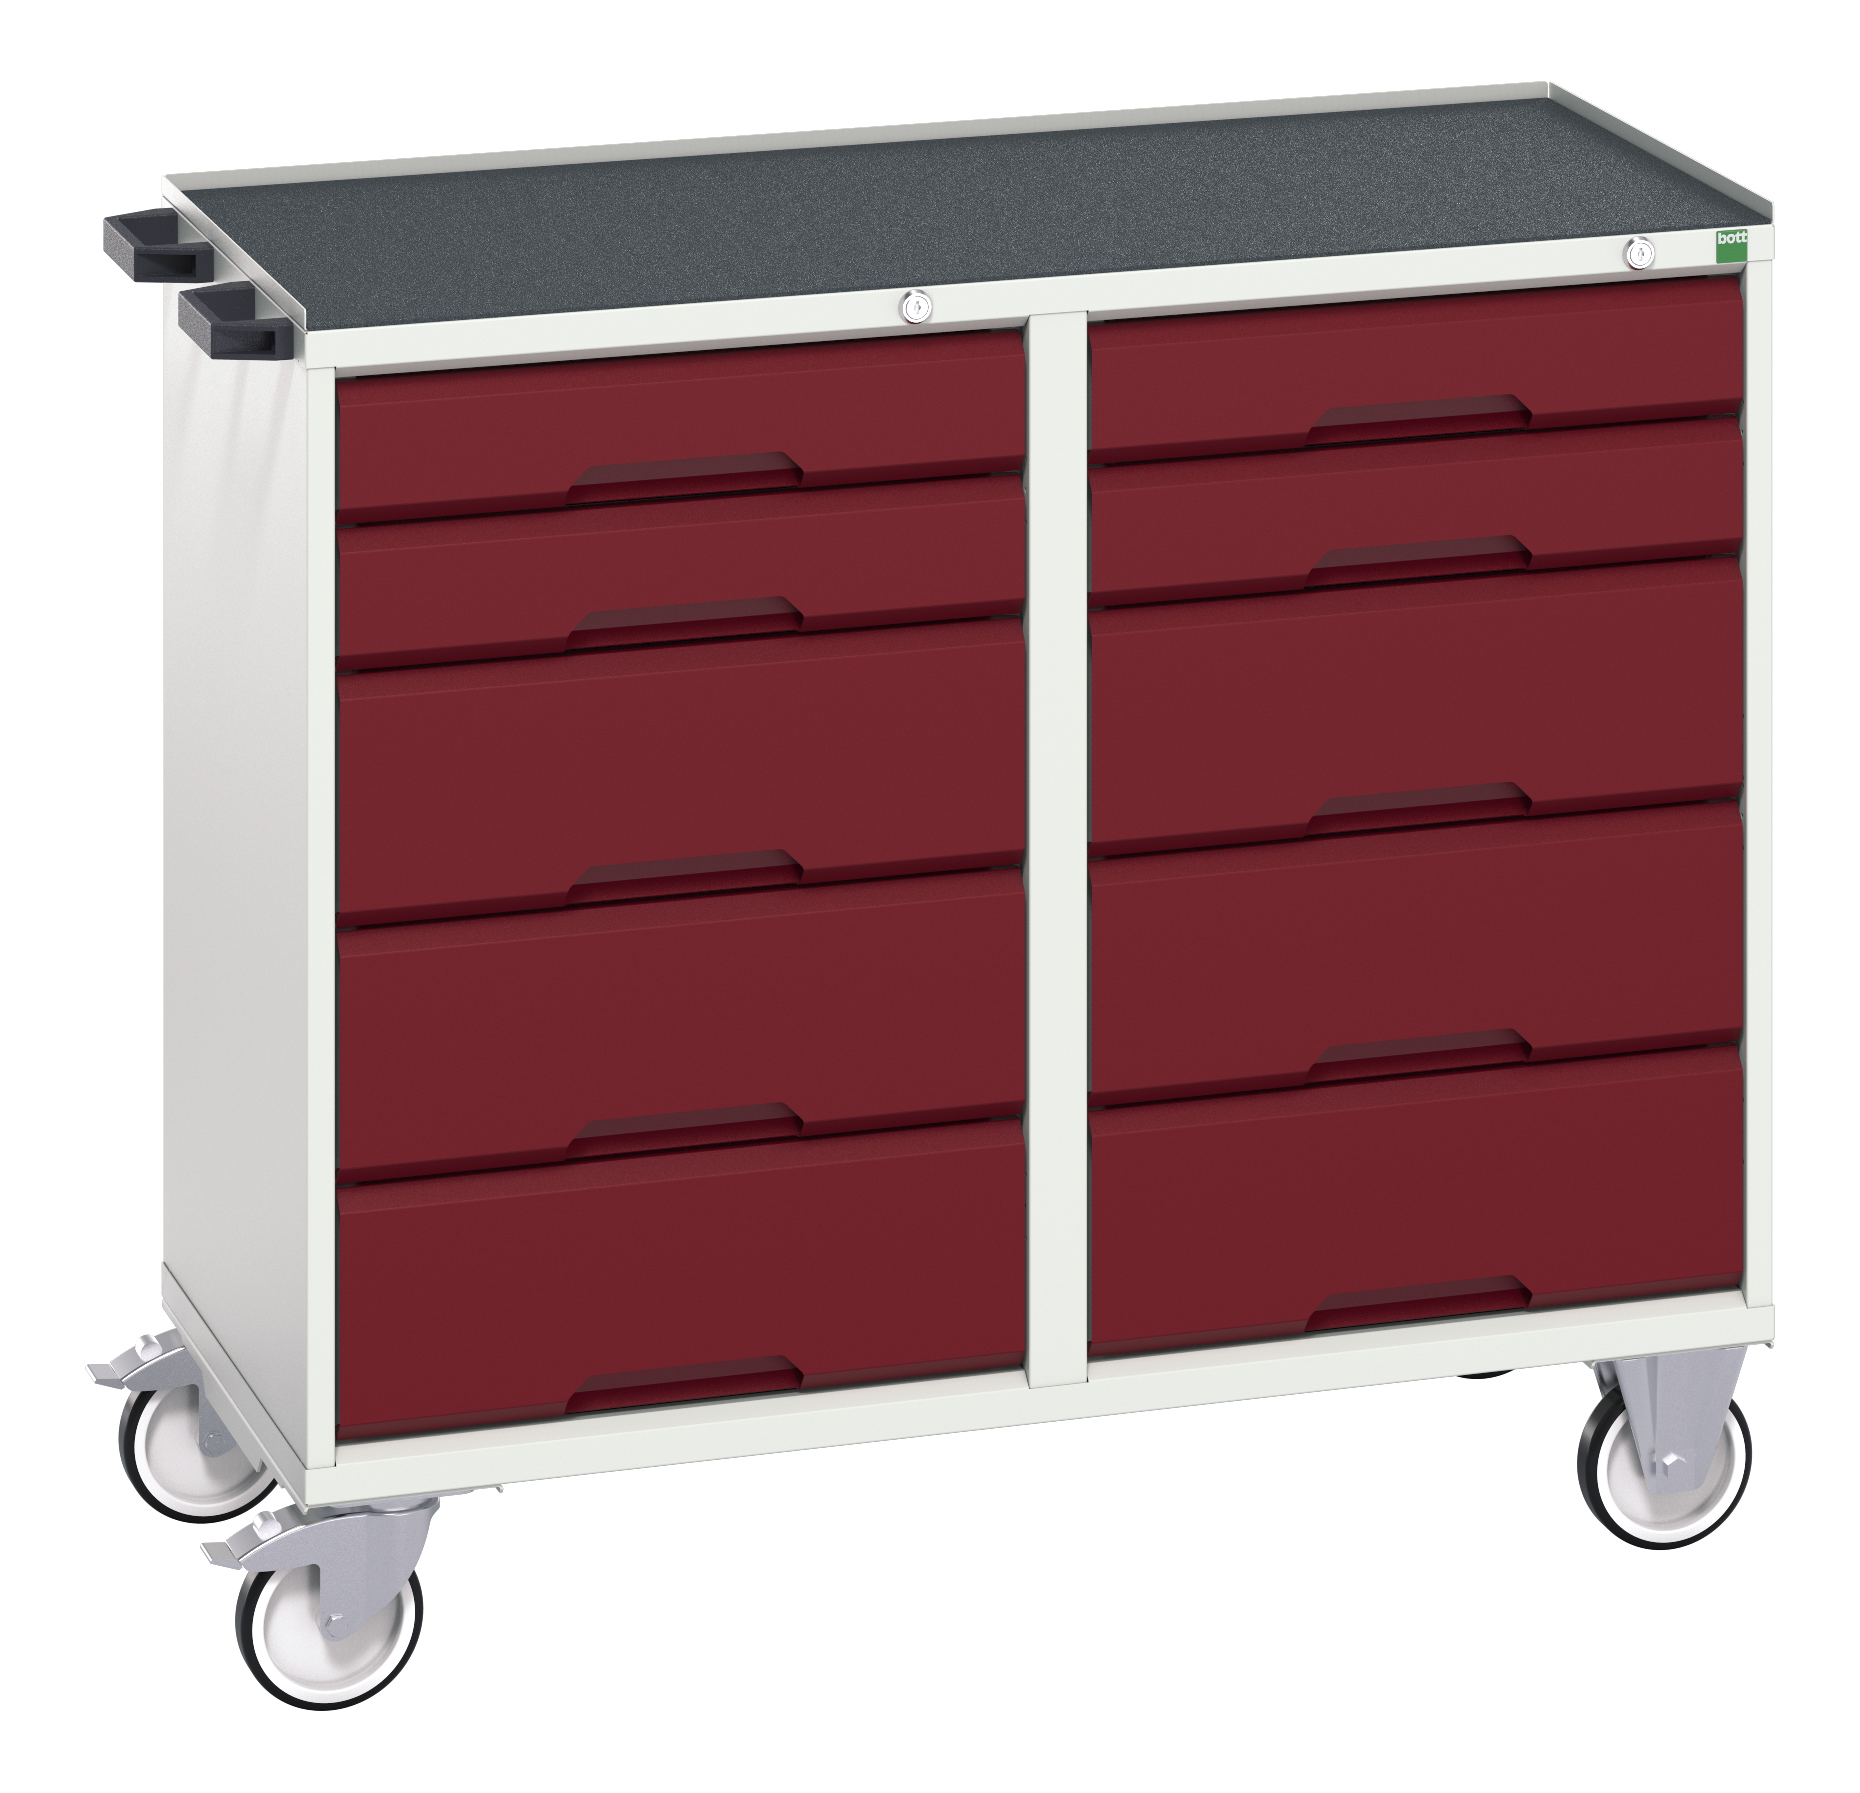 Bott Verso Maintenance Trolley With 10 Drawers & Top Tray With Mat - 16927102.24